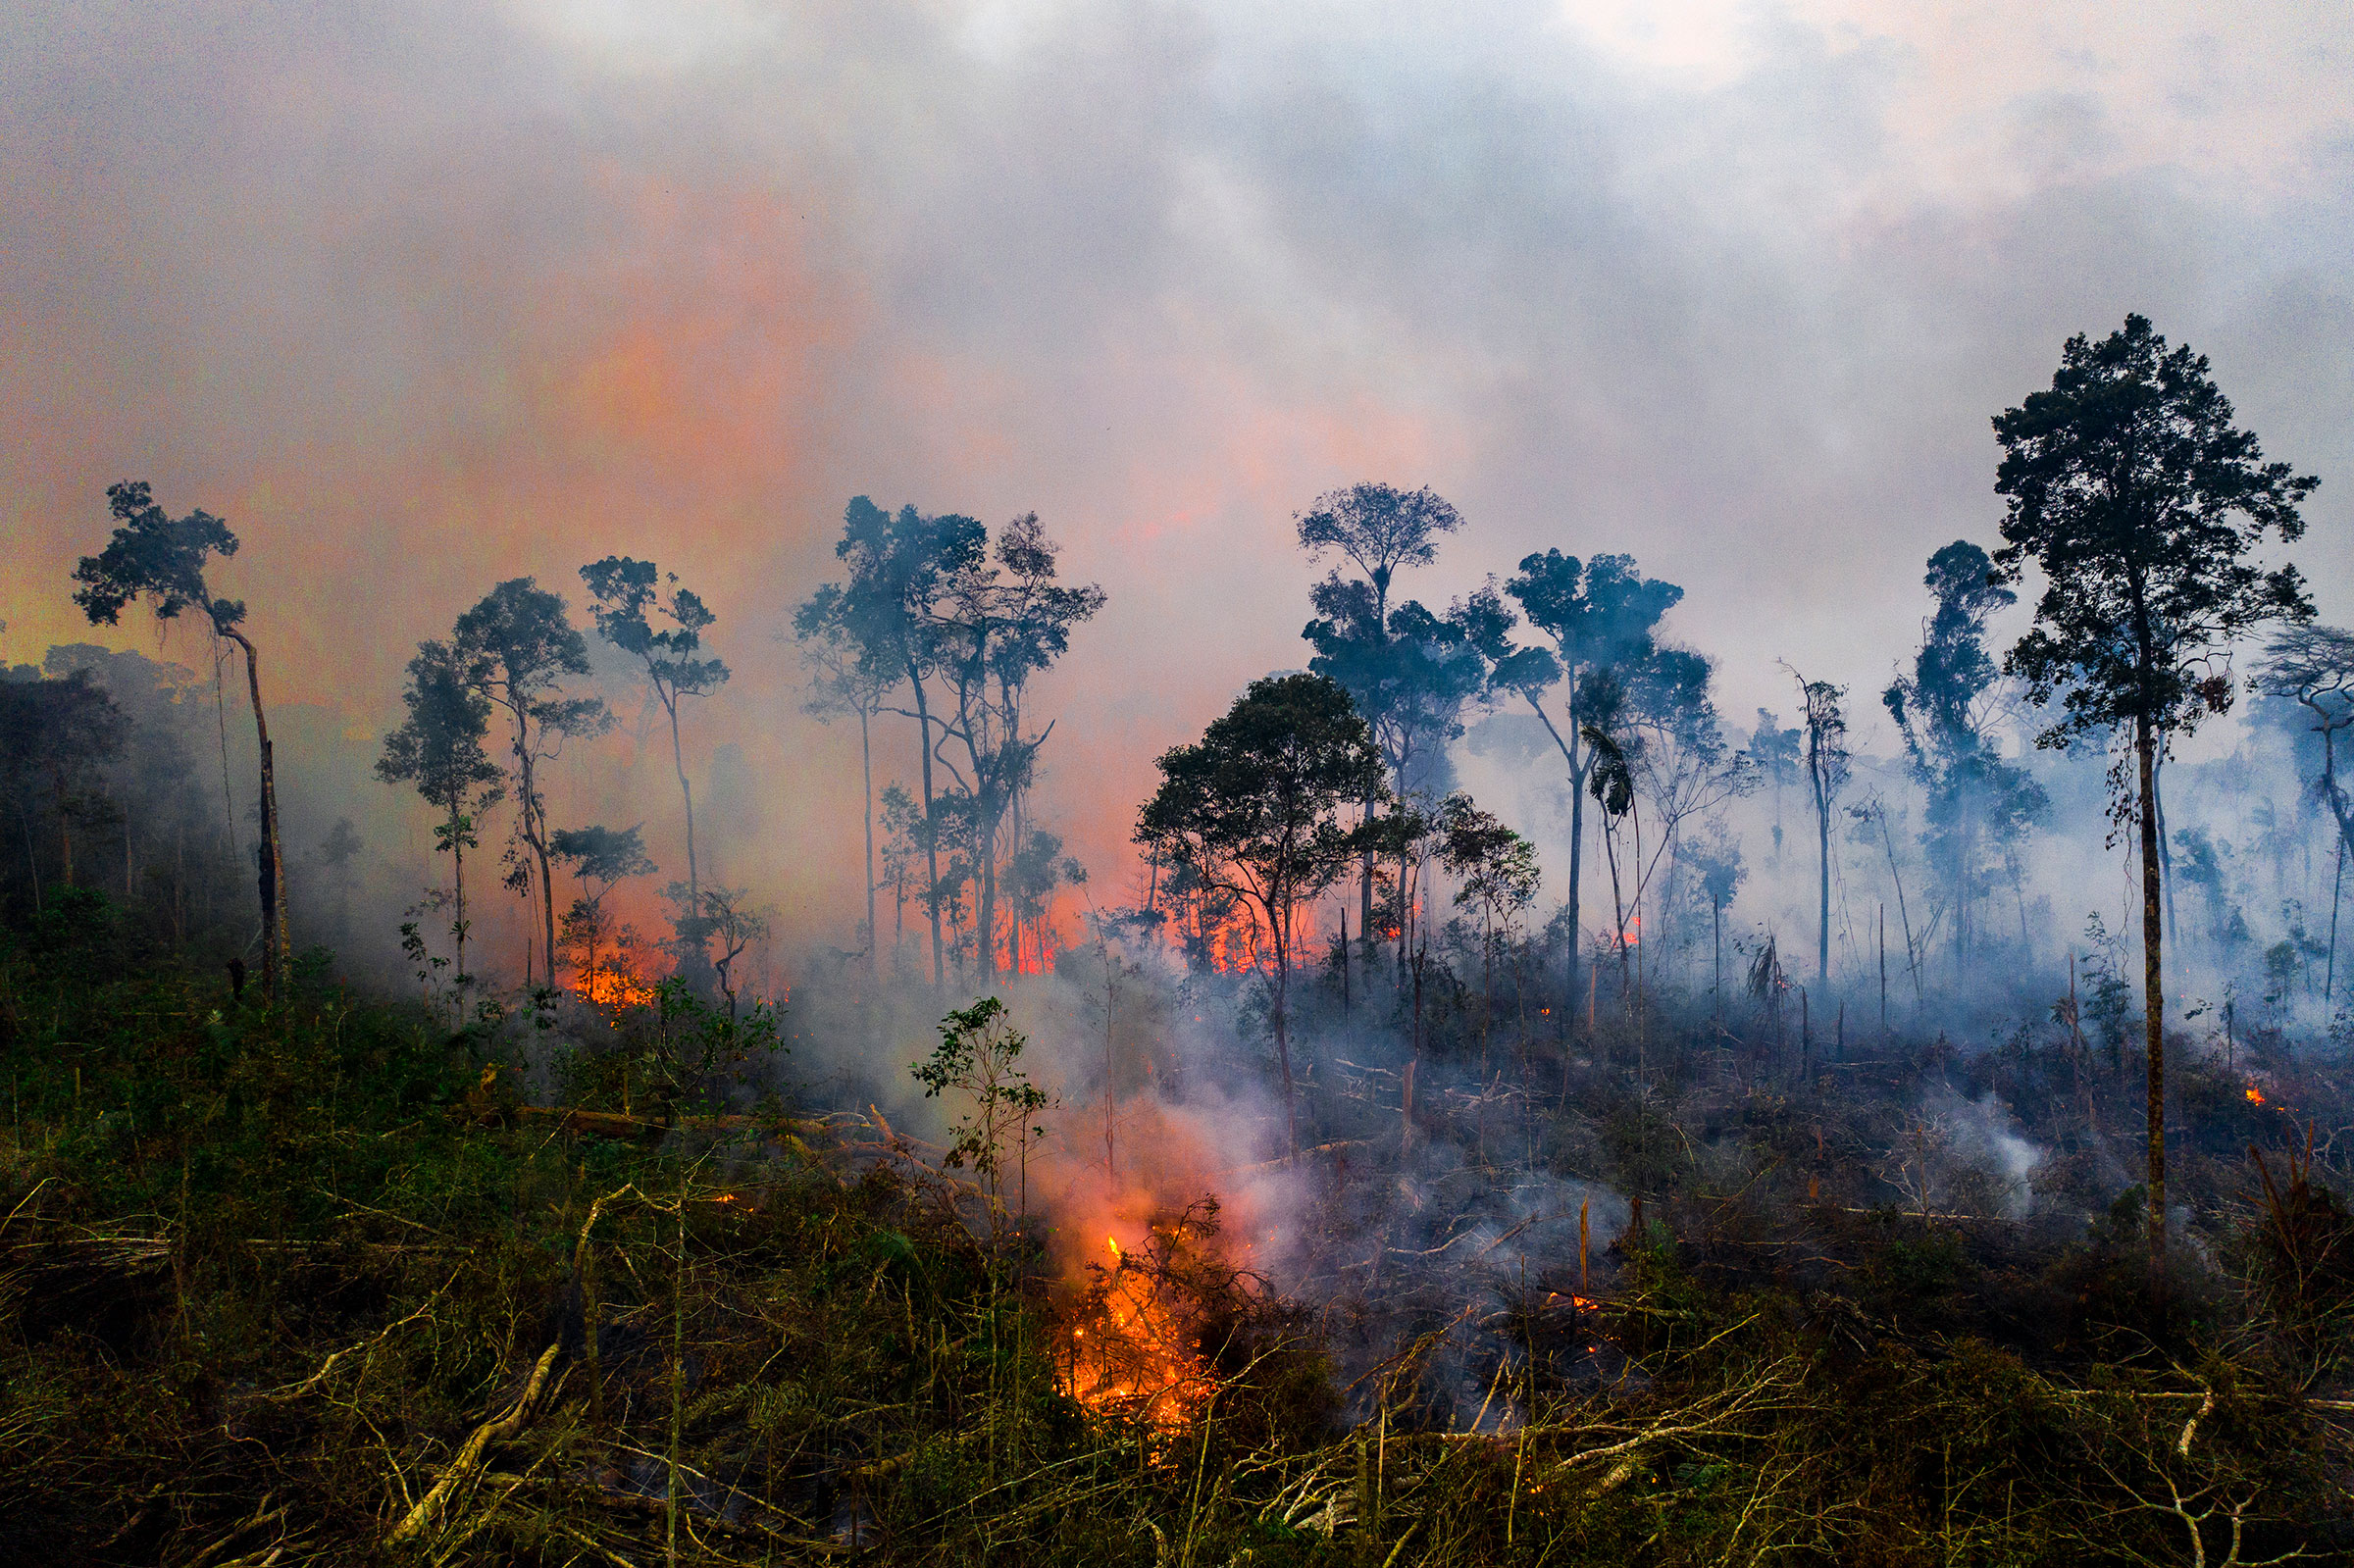 A fire near the Jacundá National Forest in Brazil’s Amazon in August